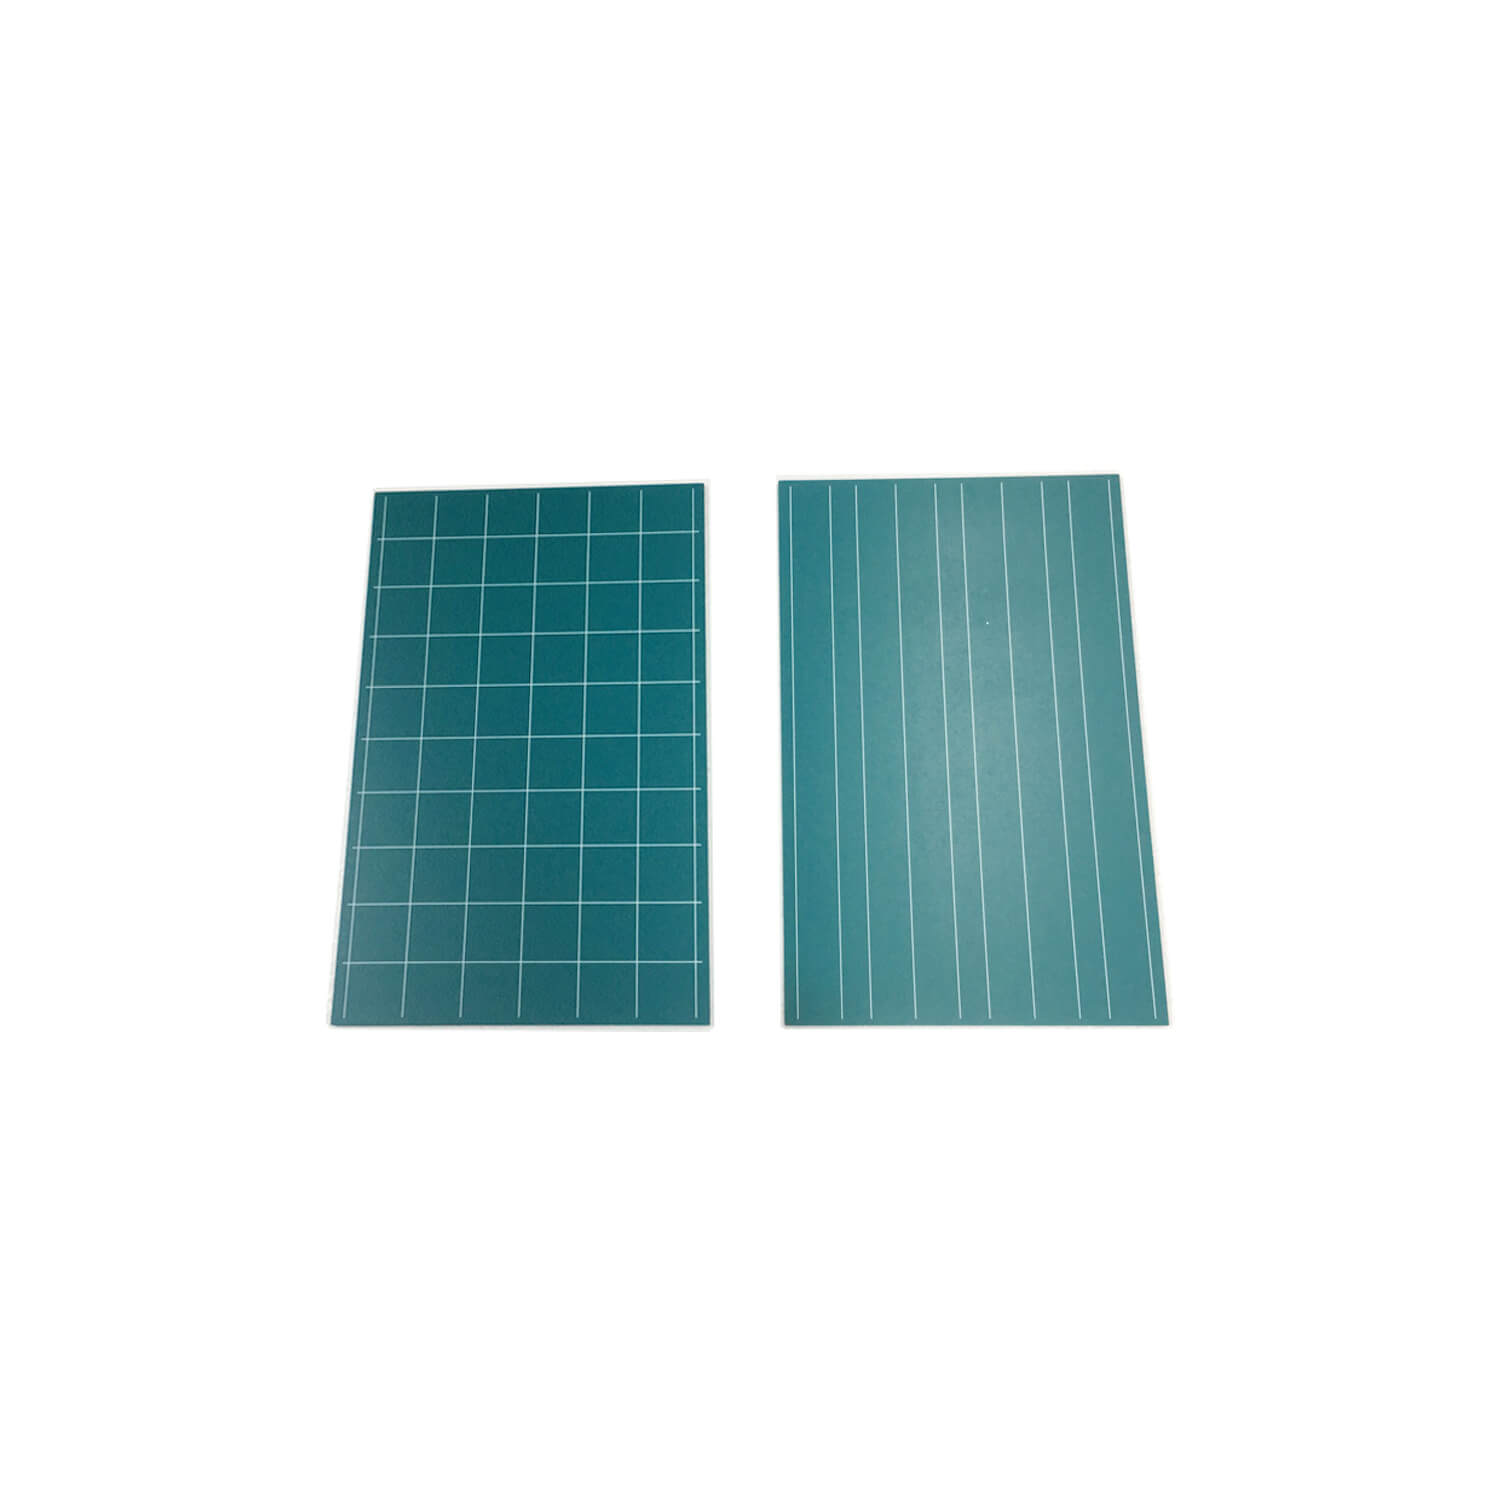 Greenboards With Double Lines And Squares(written by Chalk): Set Of 2